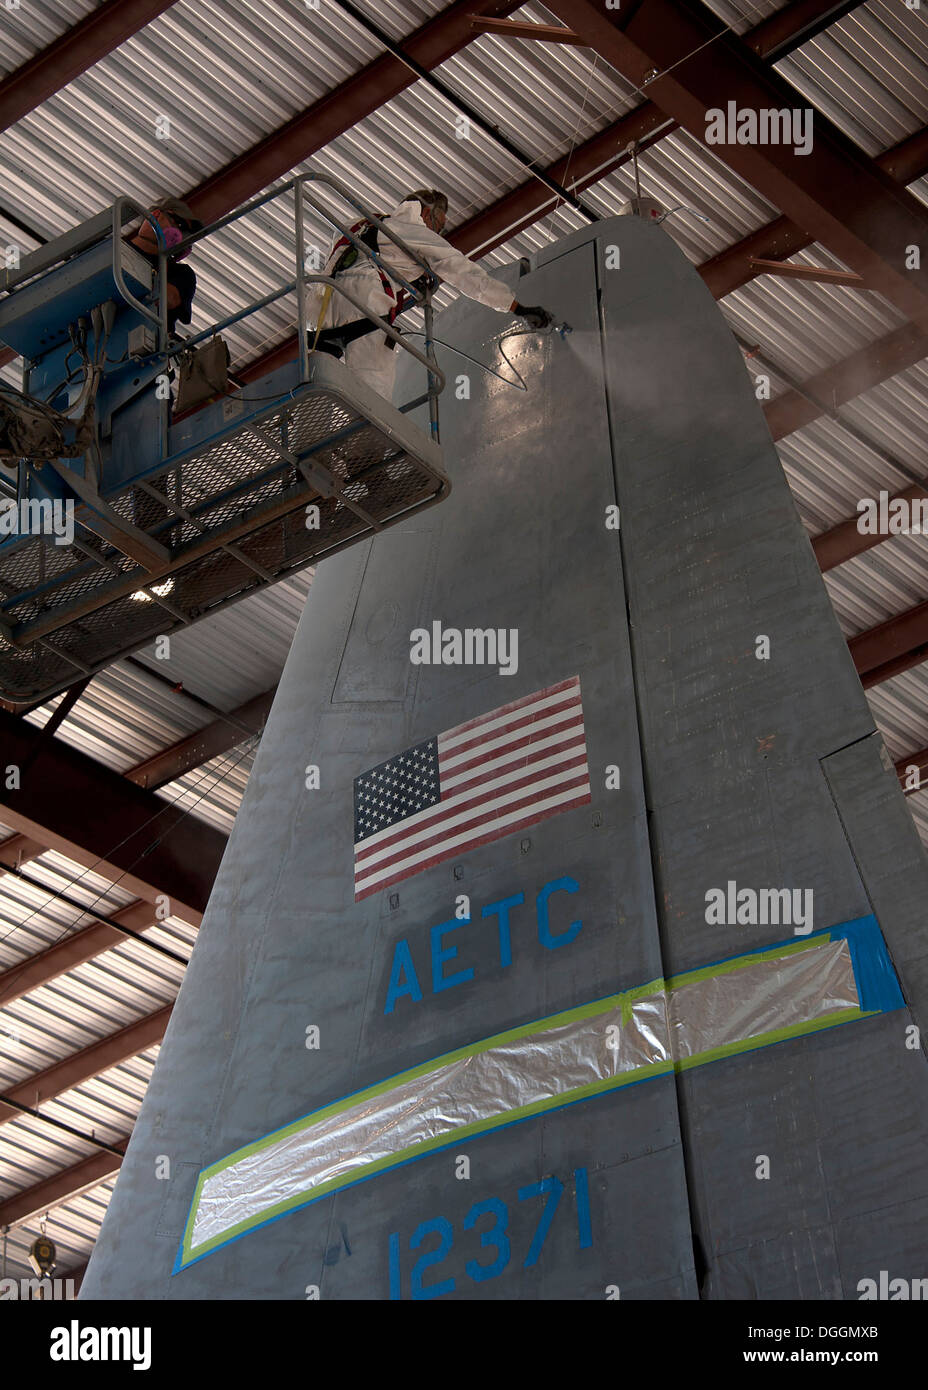 Mr. Larry Allen, Aircraft Painter, L3 Communications Integrated Systems Vertex Aerospace, apply paint to protect the C130 aircraft body from corrosion that can easily occur at high altitudes at Sheppard Air Force Base, Texas, Oct. 09. Aircraft painter’s r Stock Photo